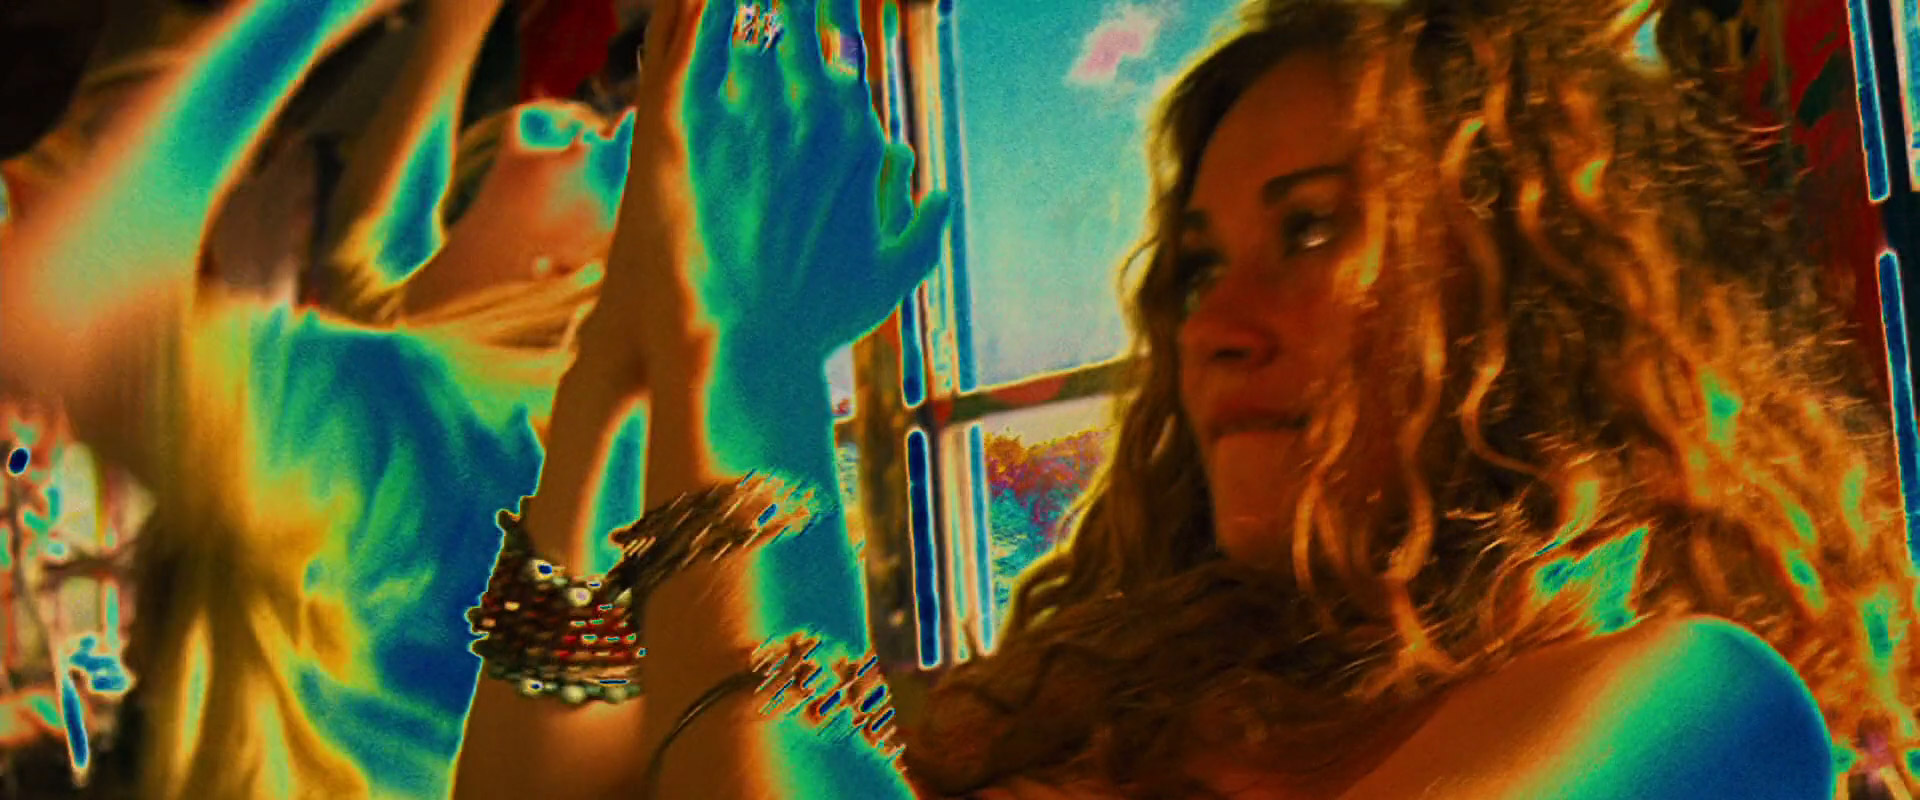 psychedelic imagery in Across the Universe